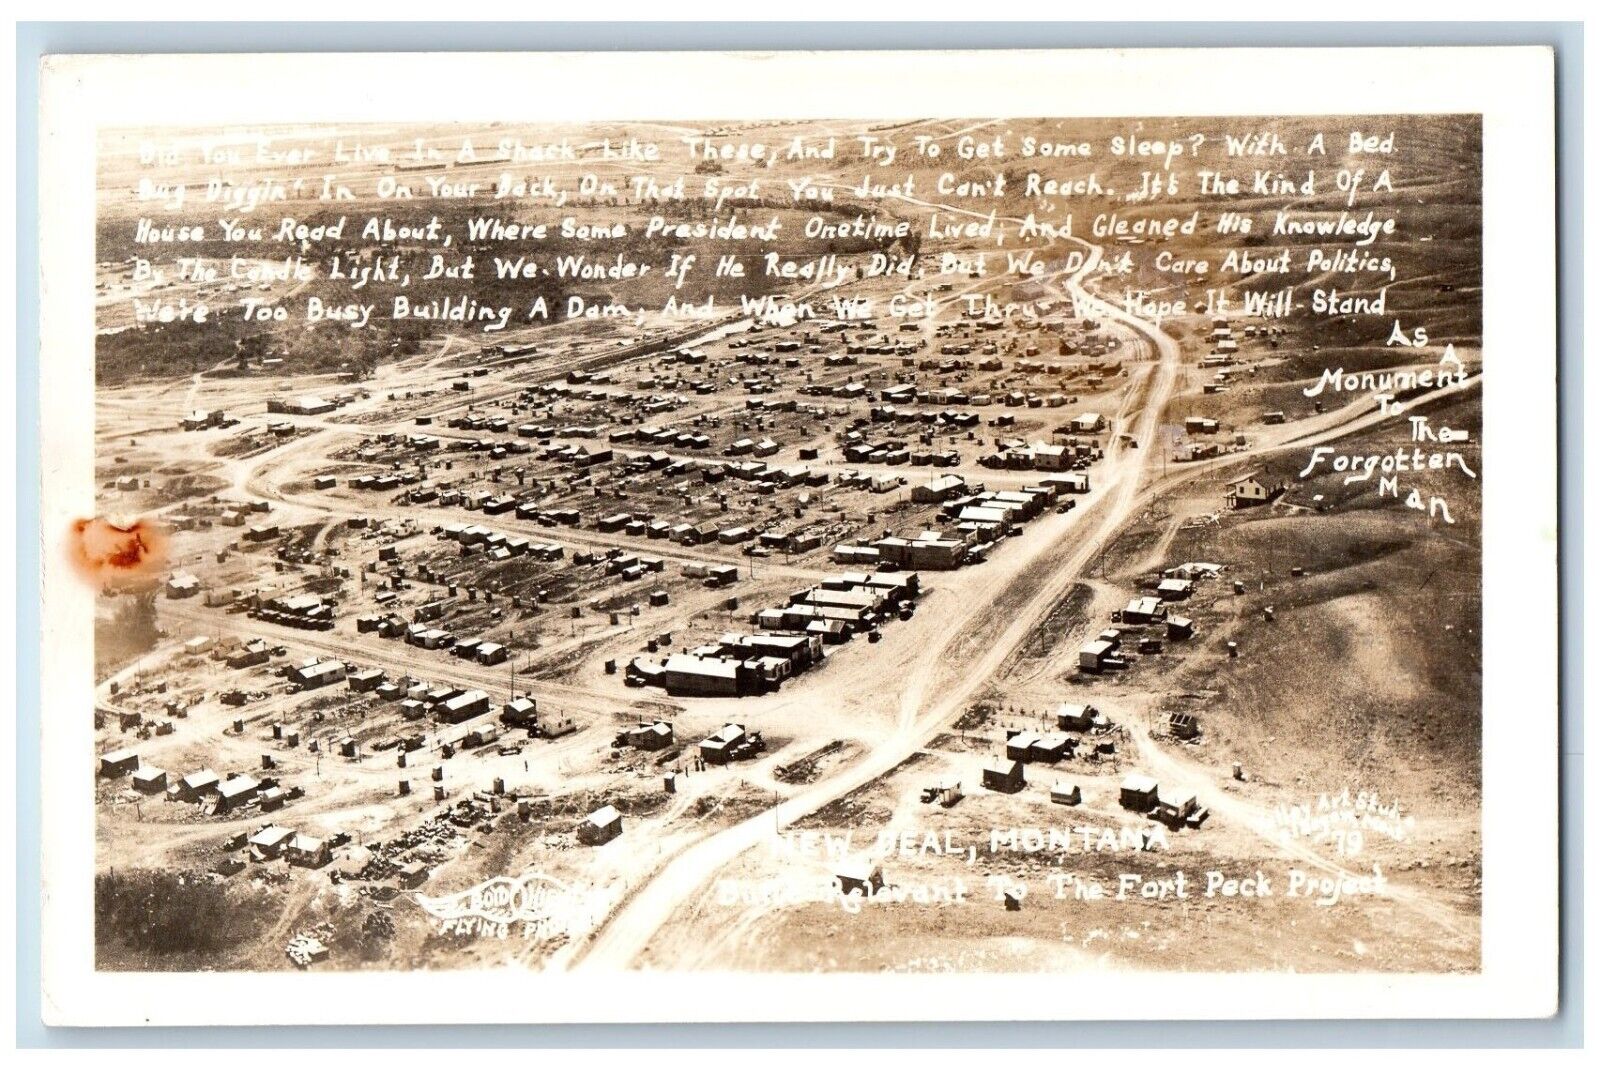 New Deal Montana MT Postcard RPPC Photo The Fort Peck Project c1940\'s Vintage